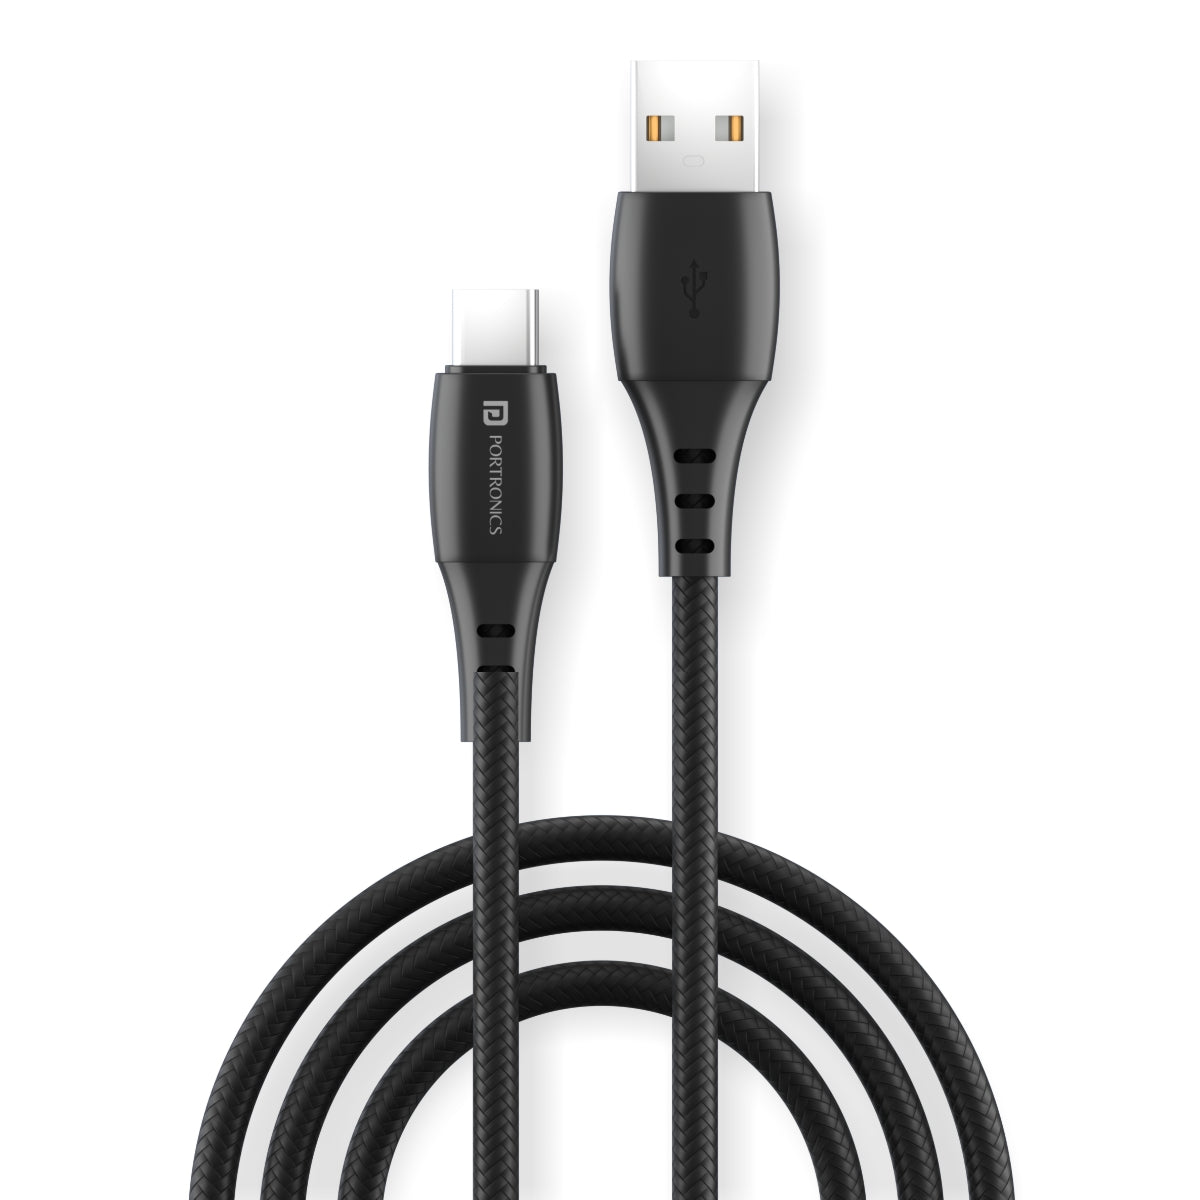 Portronics Konnect L Type C Cable with charging & Data sync function